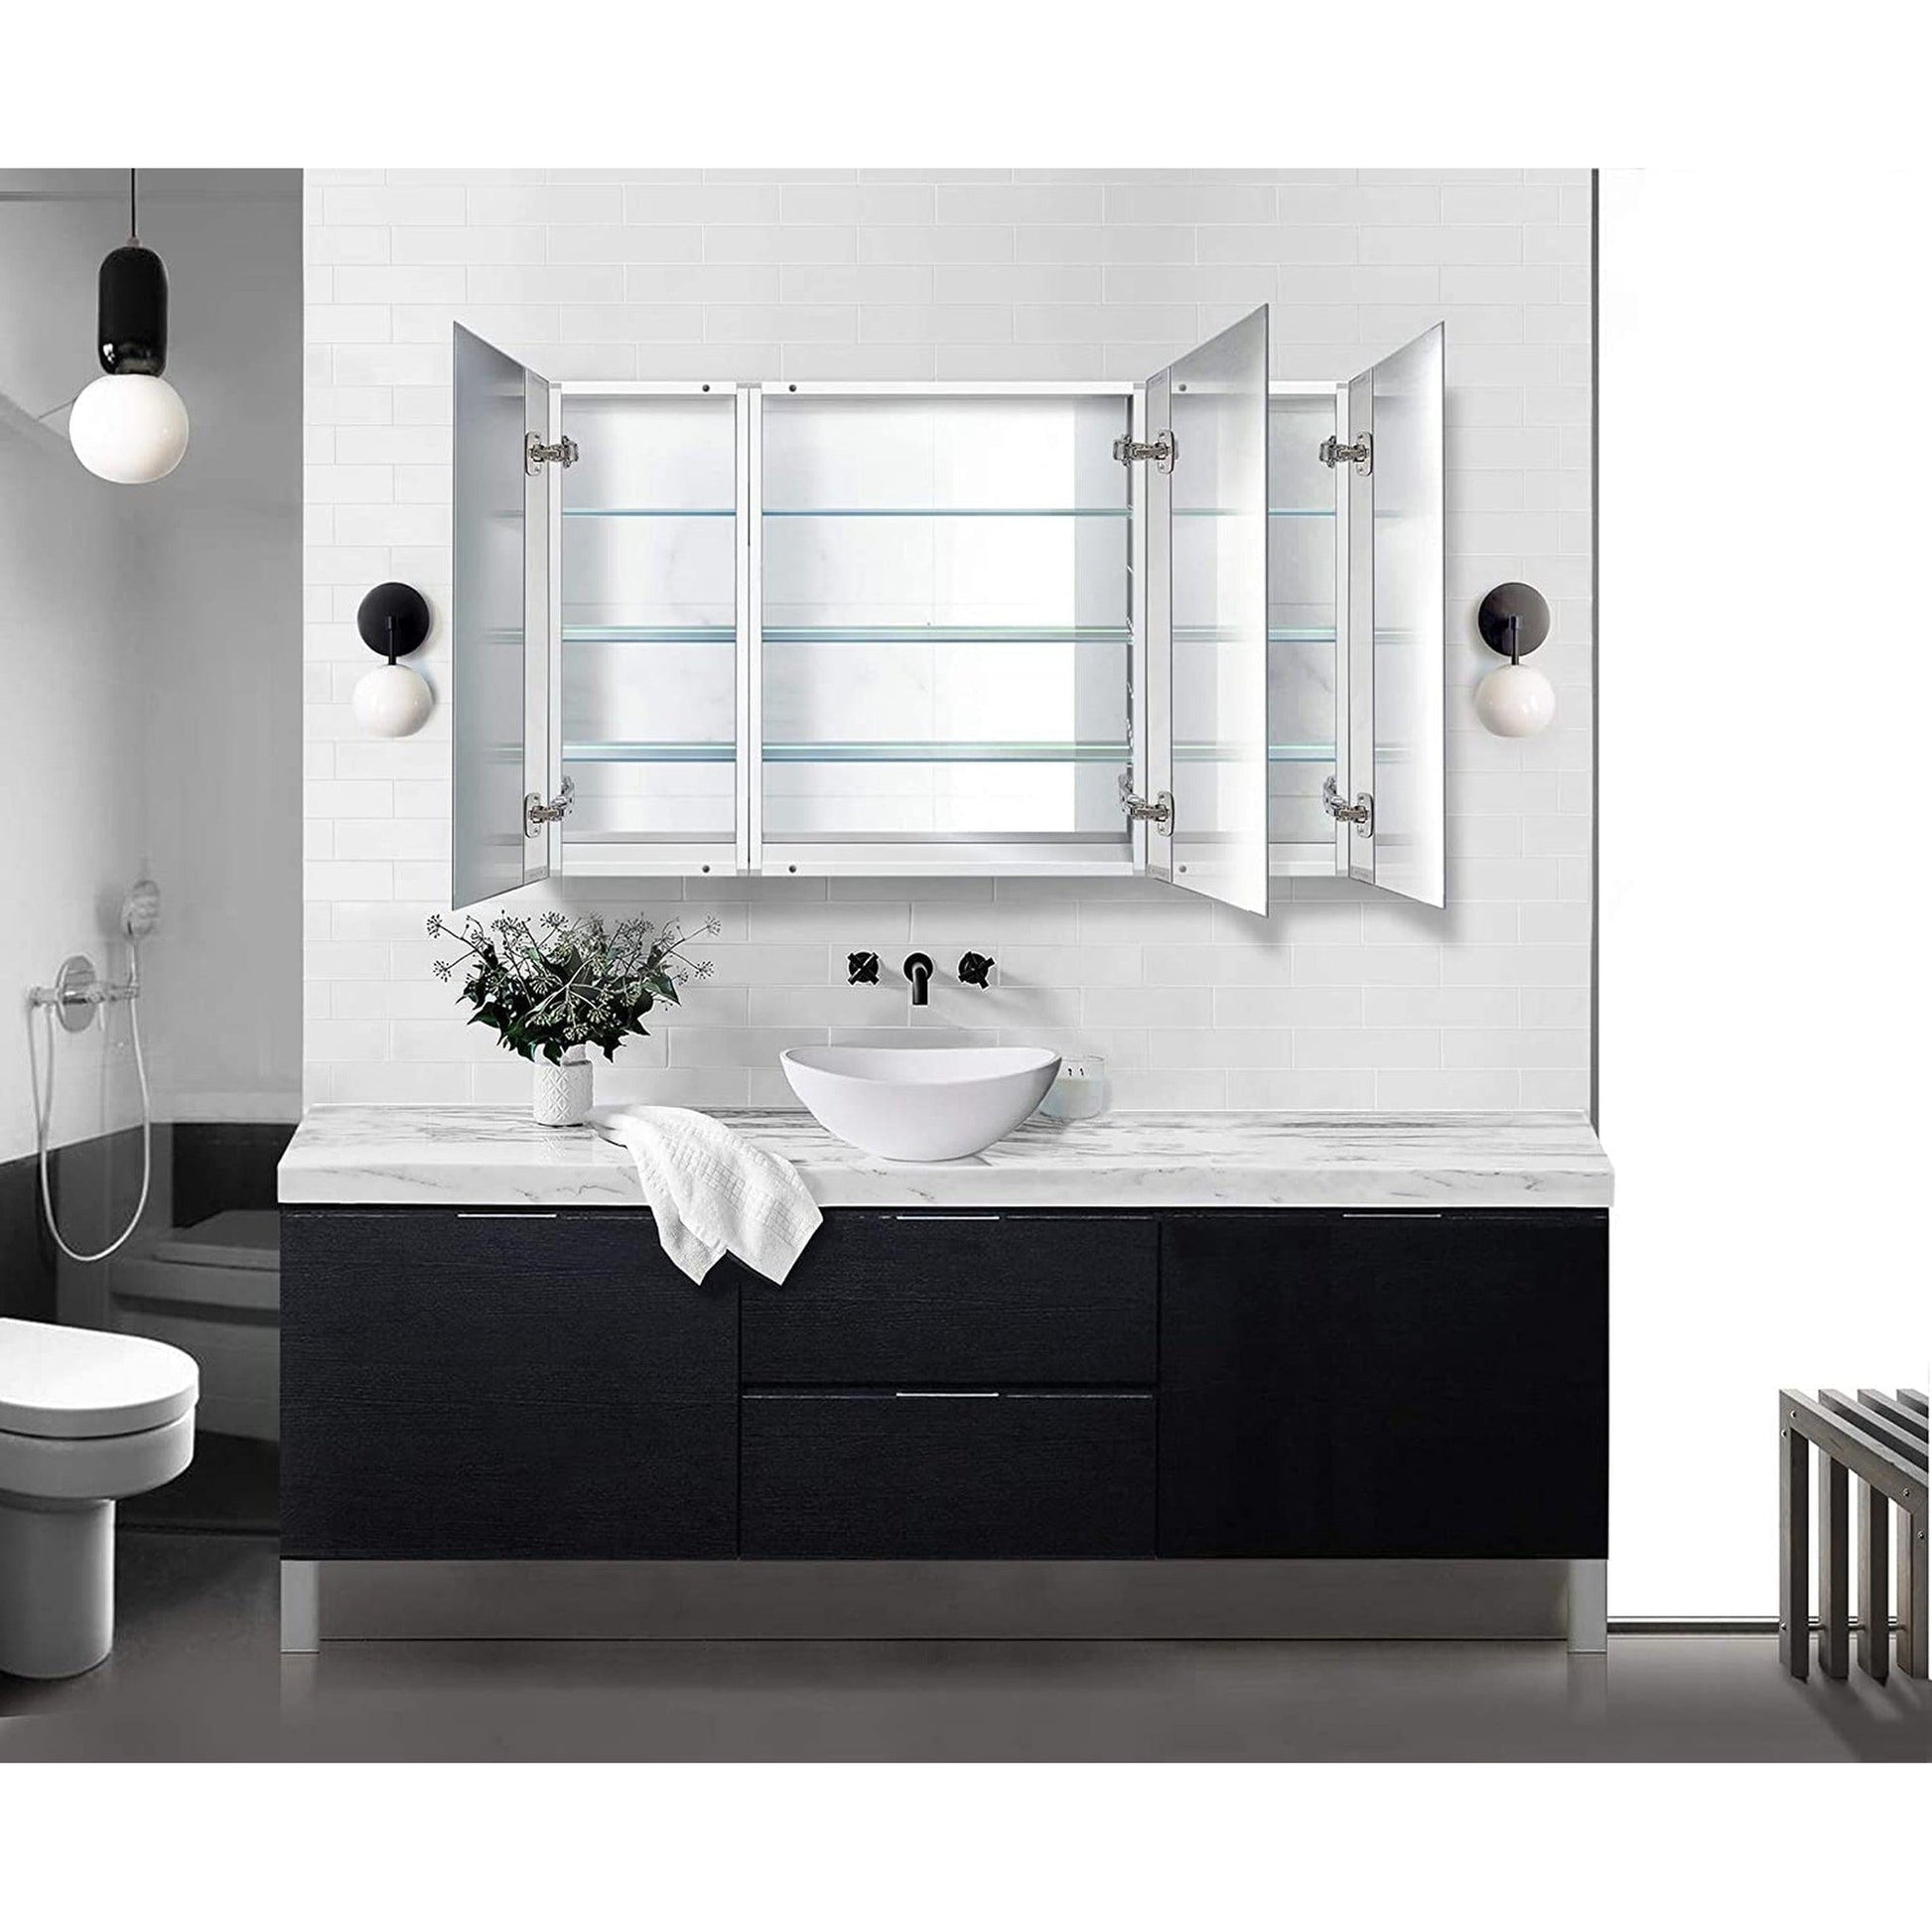 Krugg Reflections Plaza 48" x 30" Tri-View Left-Left-Right Opening Rectangular Recessed/Surface-Mount Medicine Cabinet Mirror